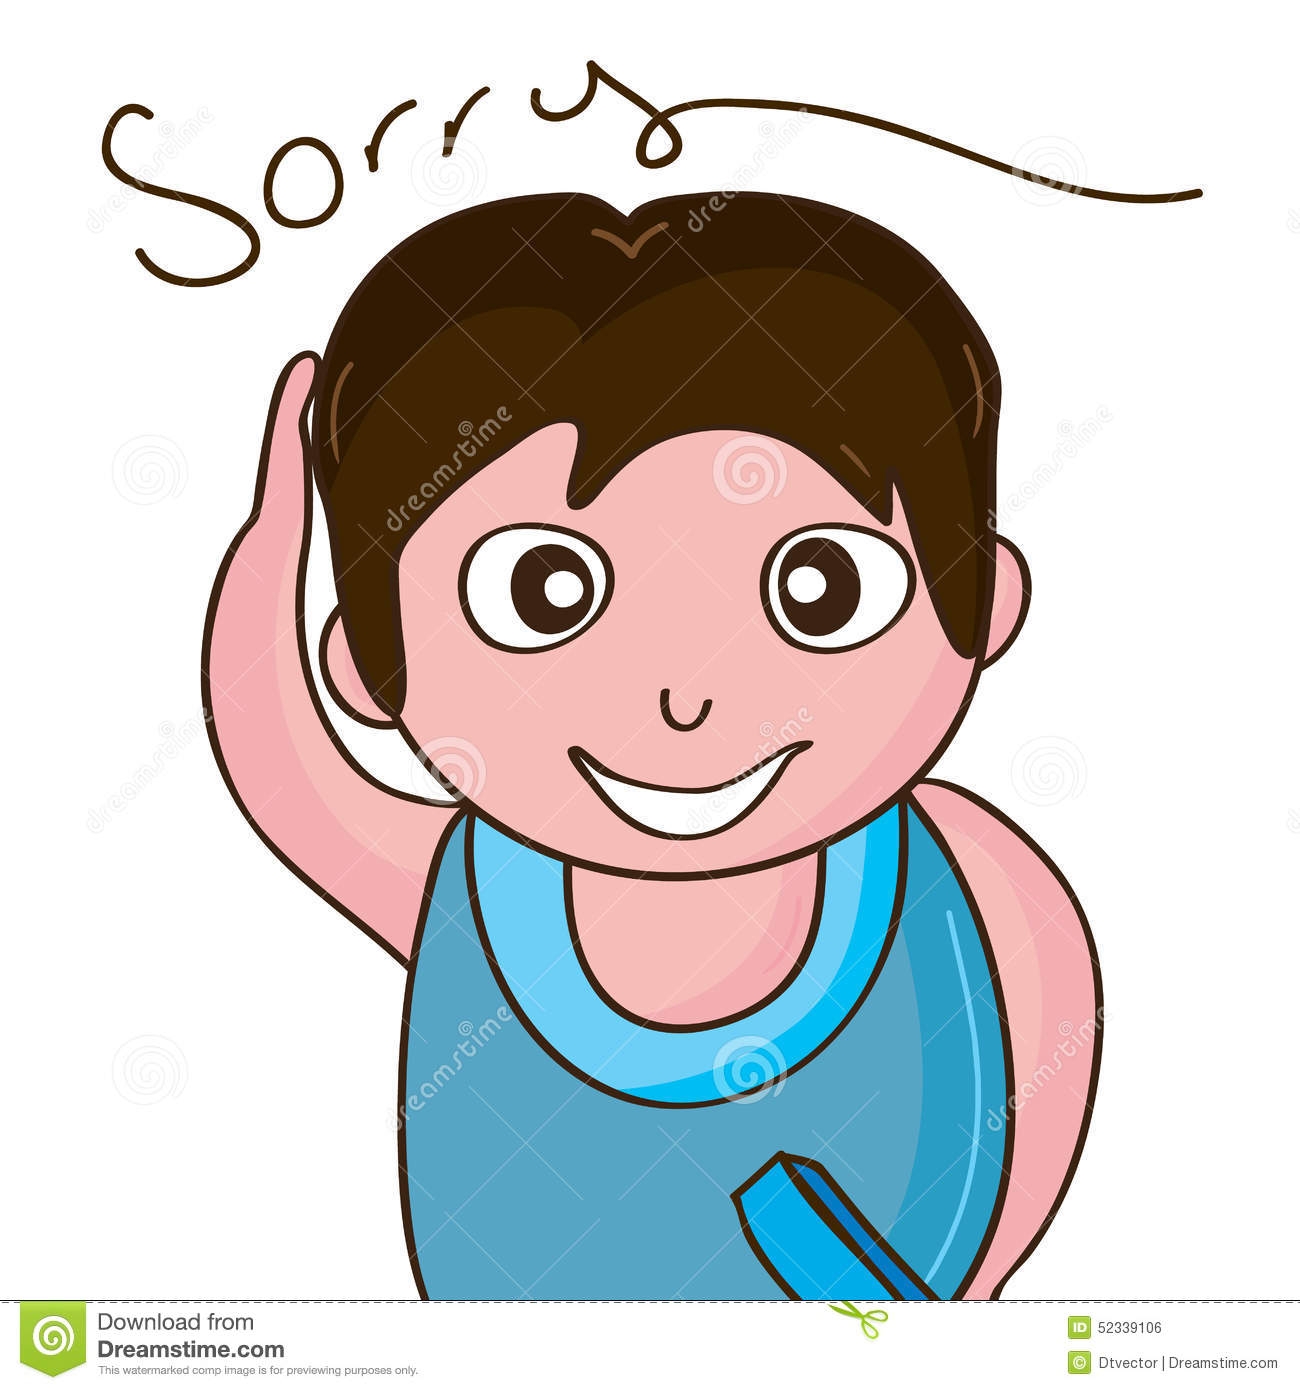 I Am Sorry Clipart